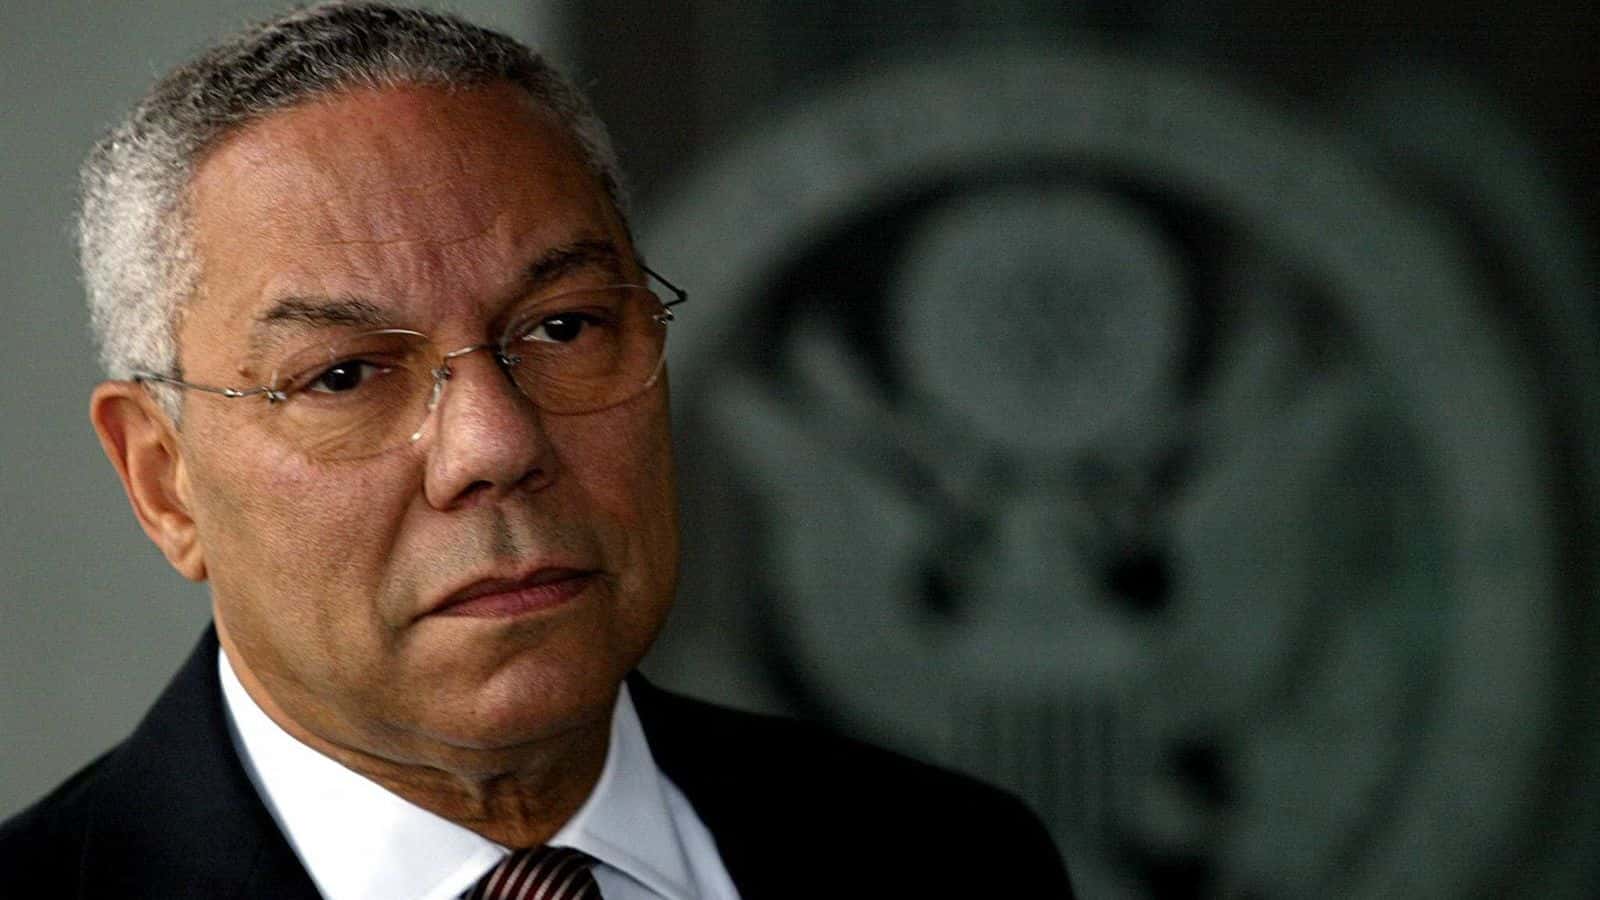 Colin Powell, first Black US secretary of state, passes away_50.1